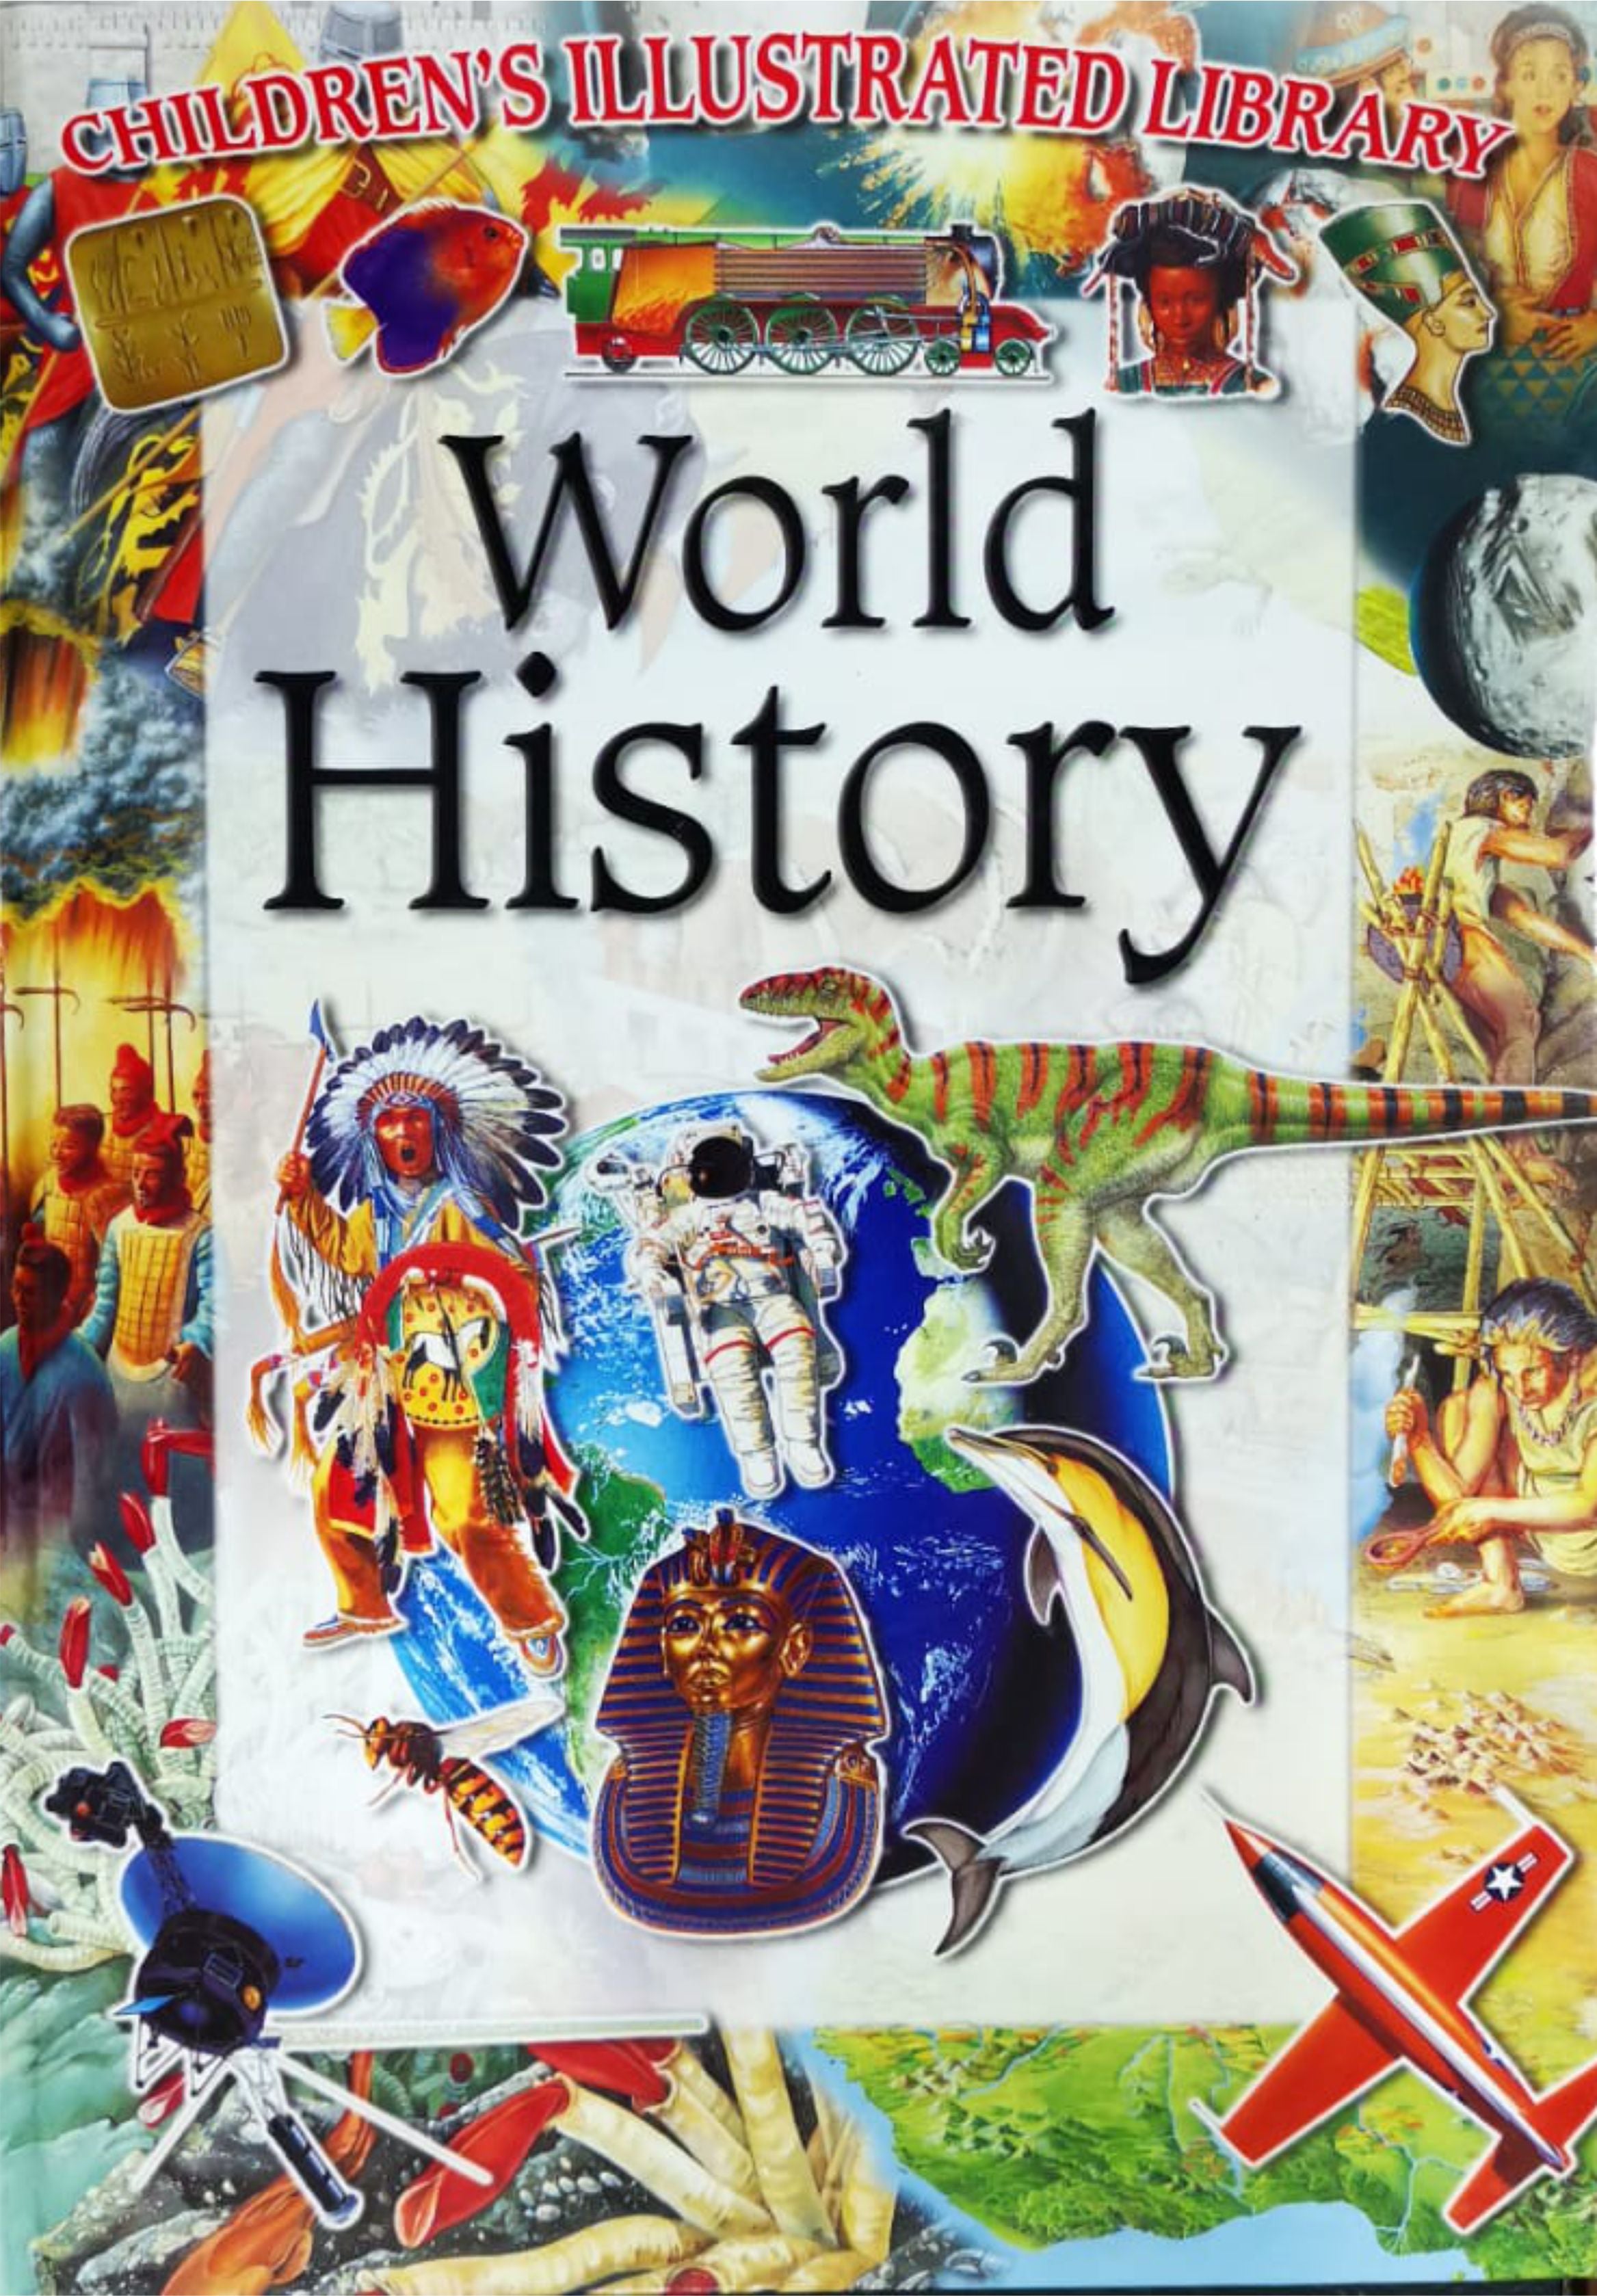 World History (Children's Illustrated Library)